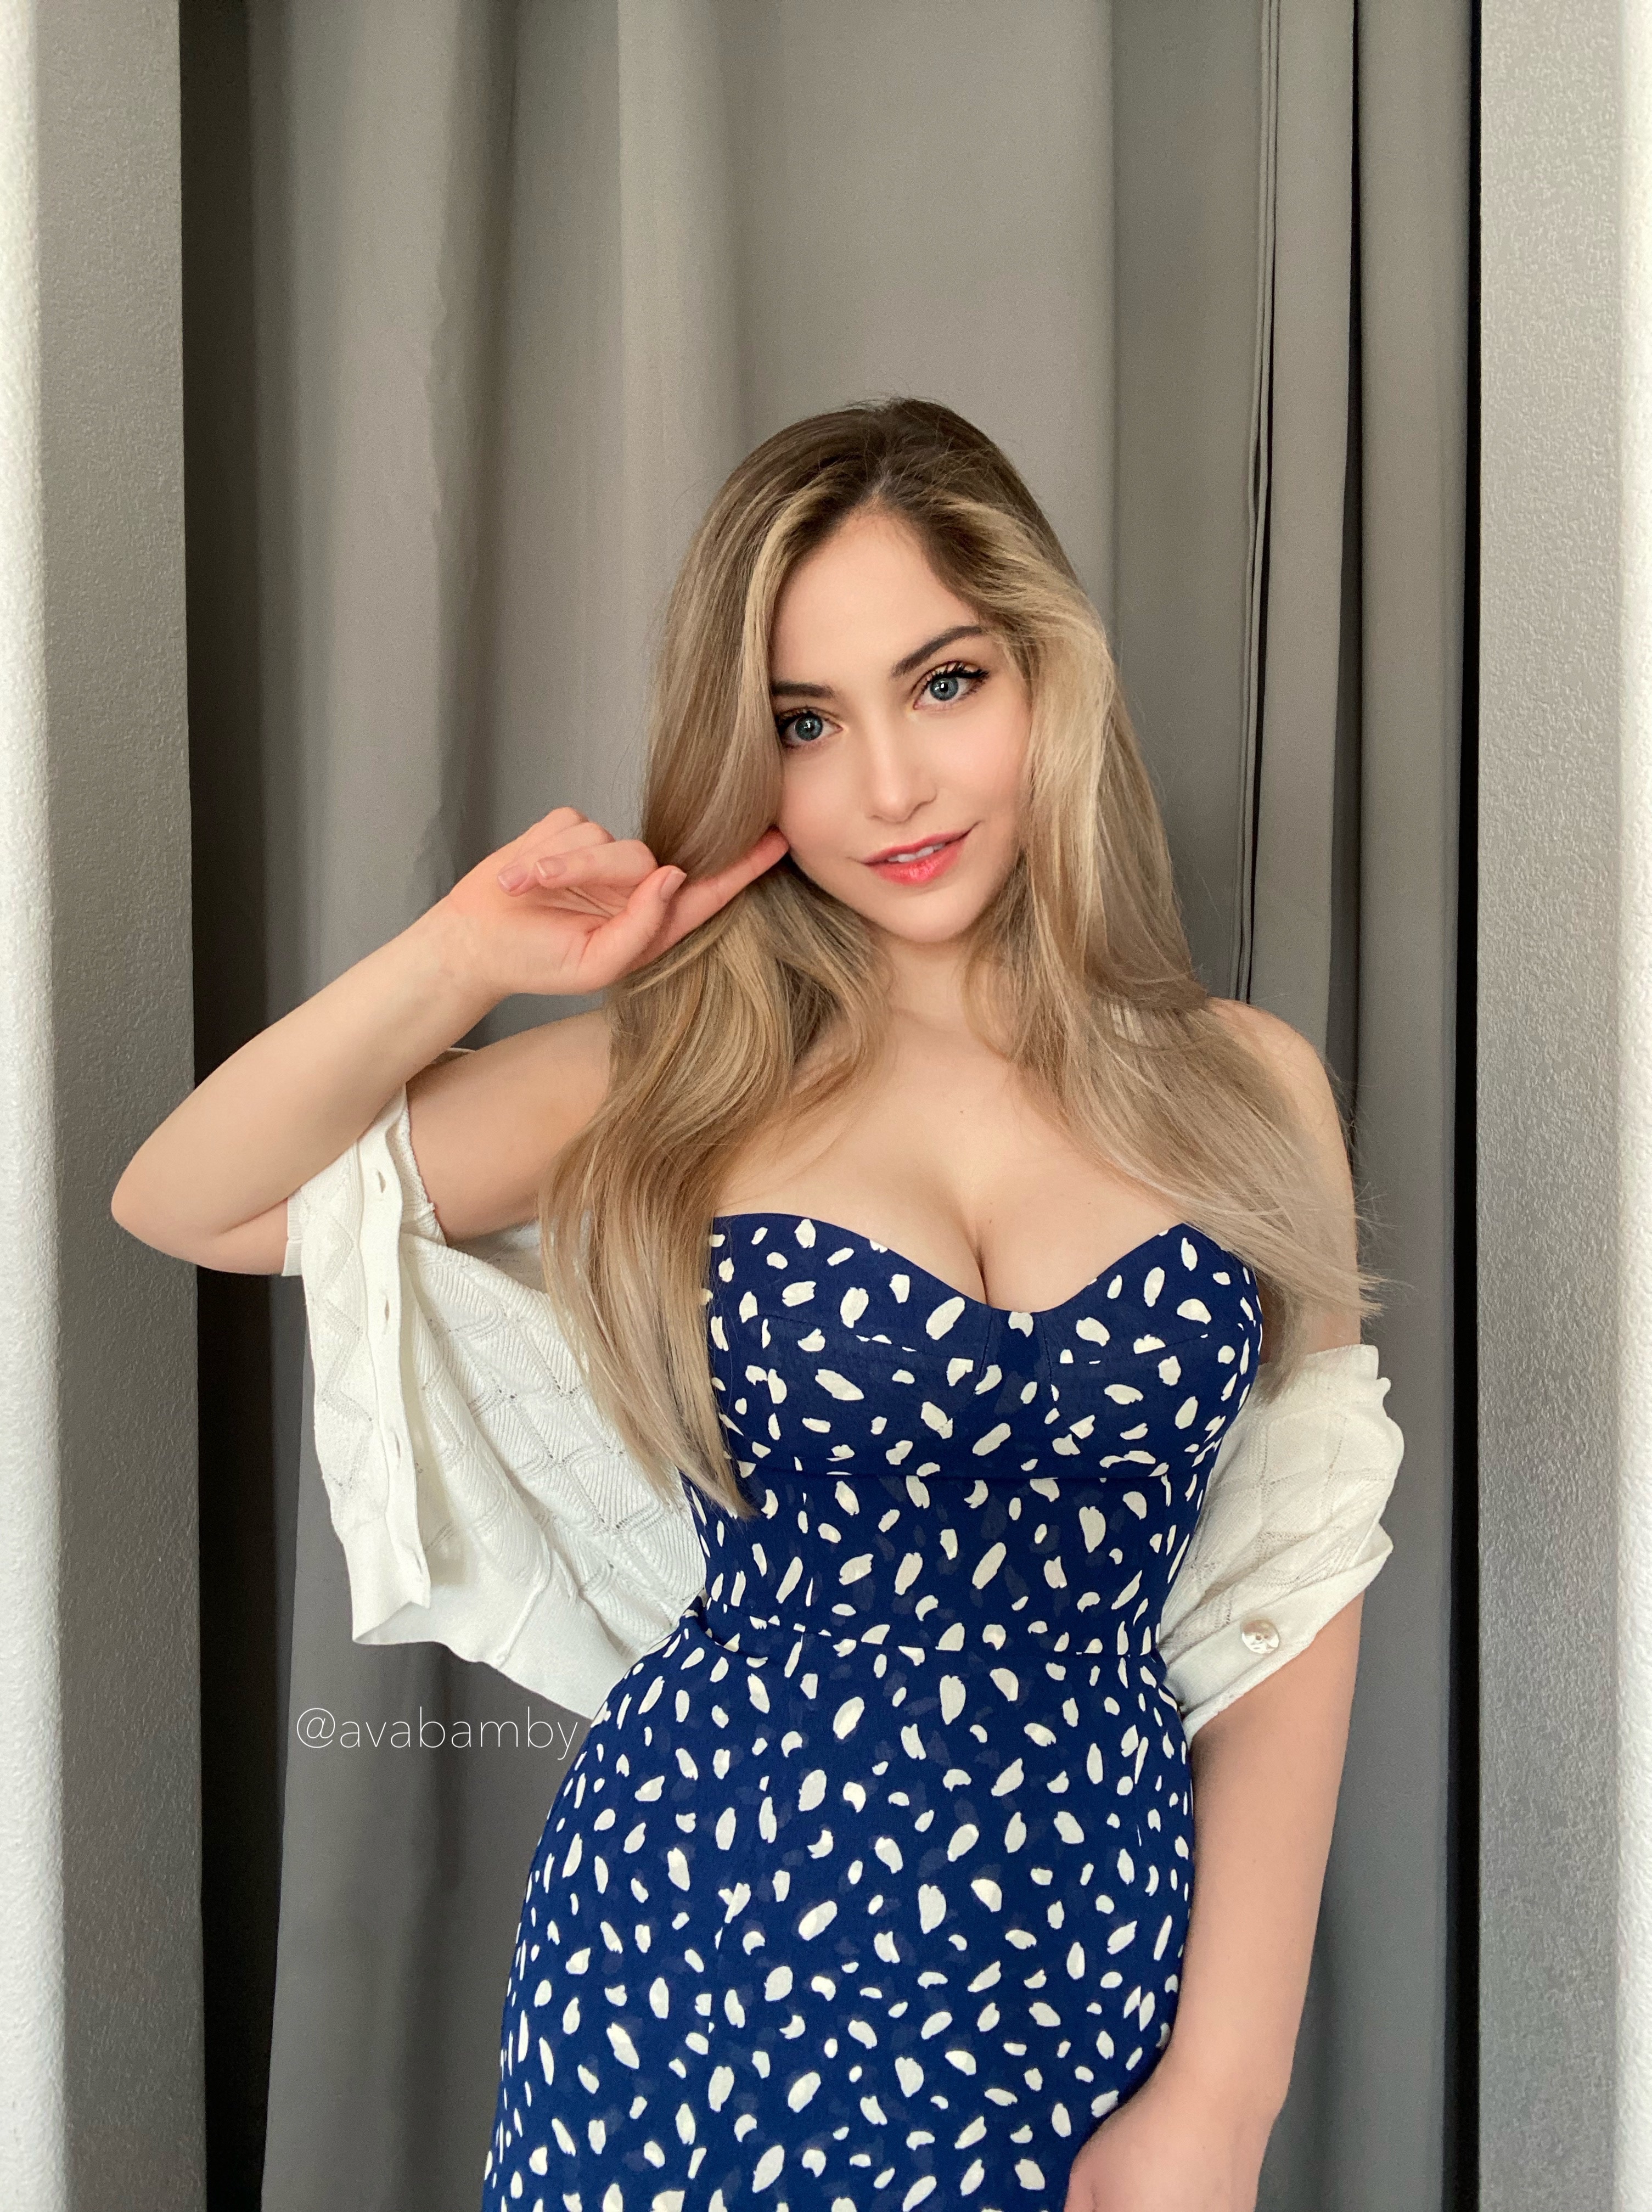 Ava bamby only fans